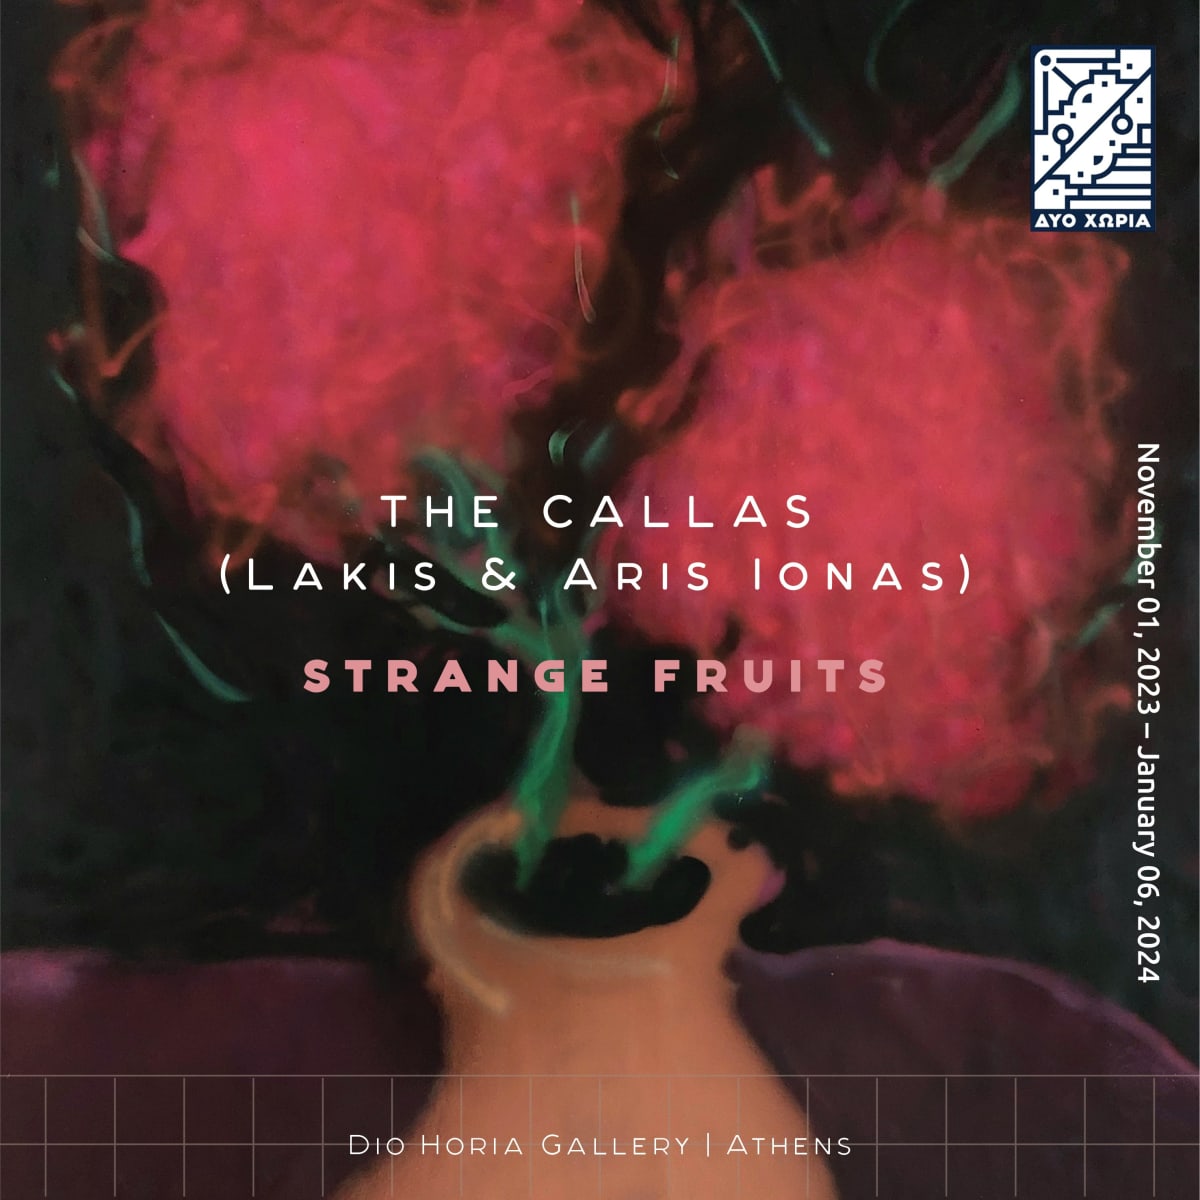 The Callas (Lakis & Aris Ionas) | Solo Show Opening